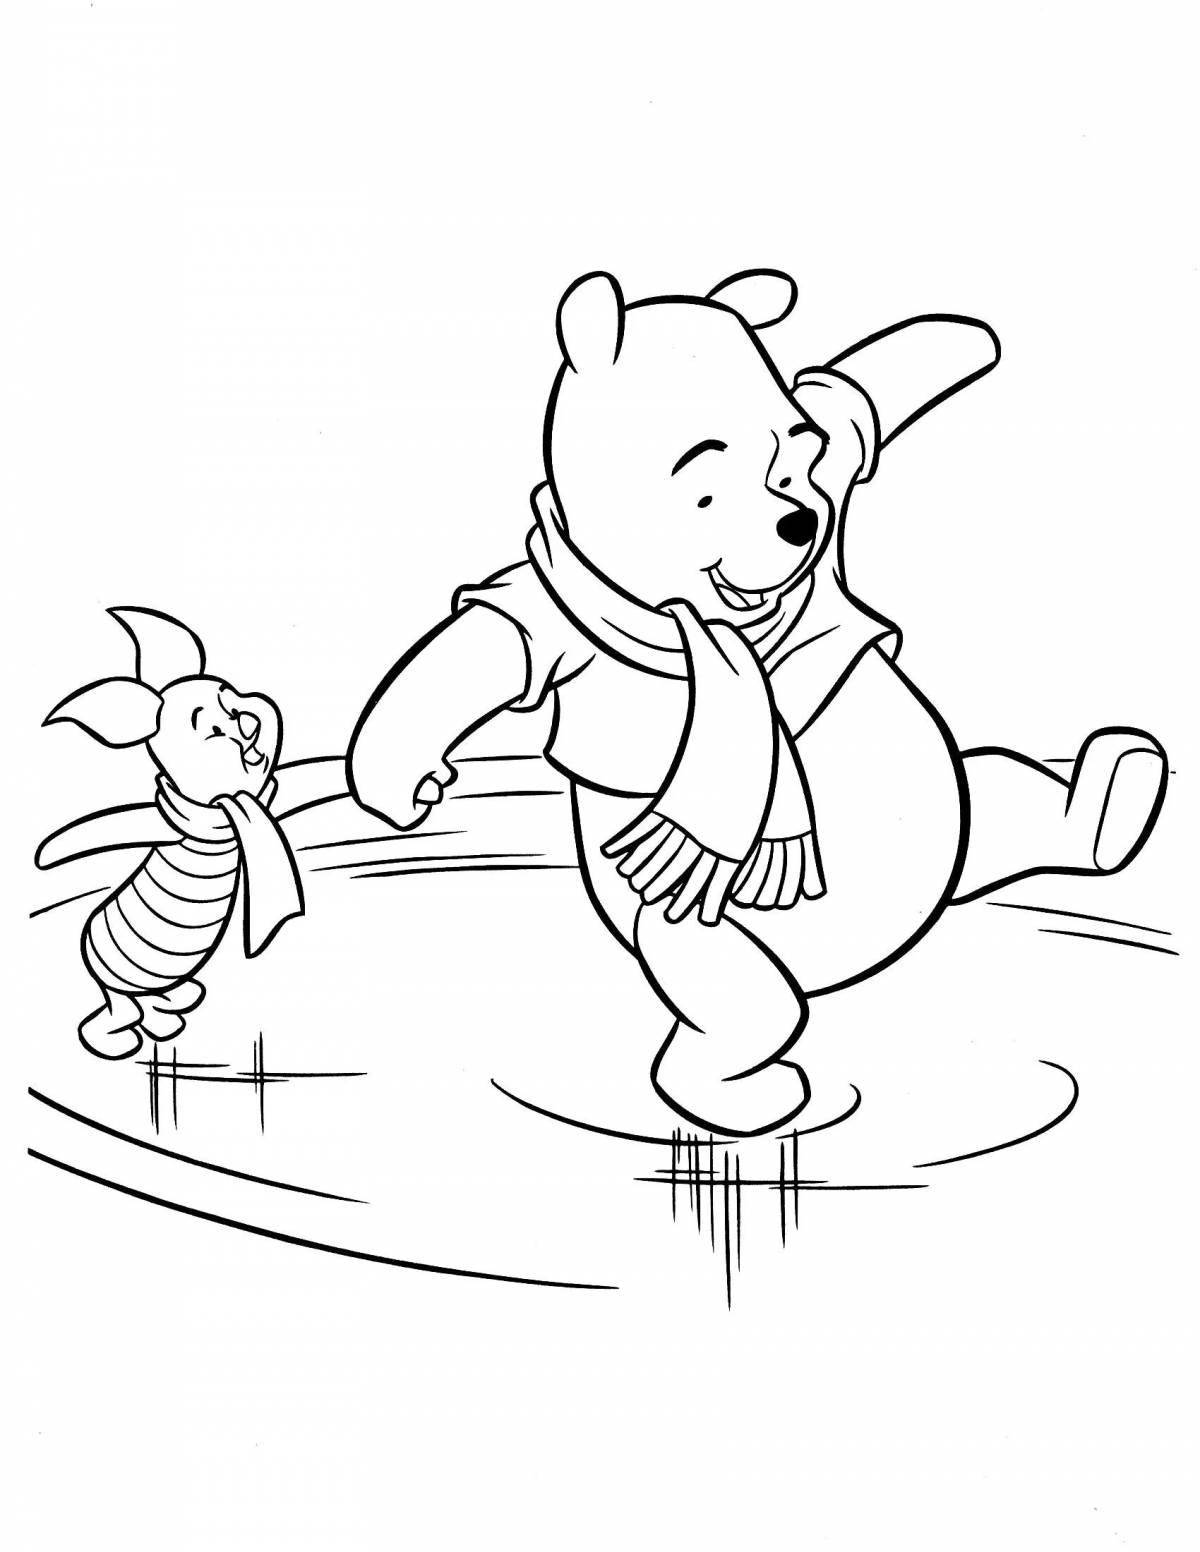 Winnie the pooh for kids #2